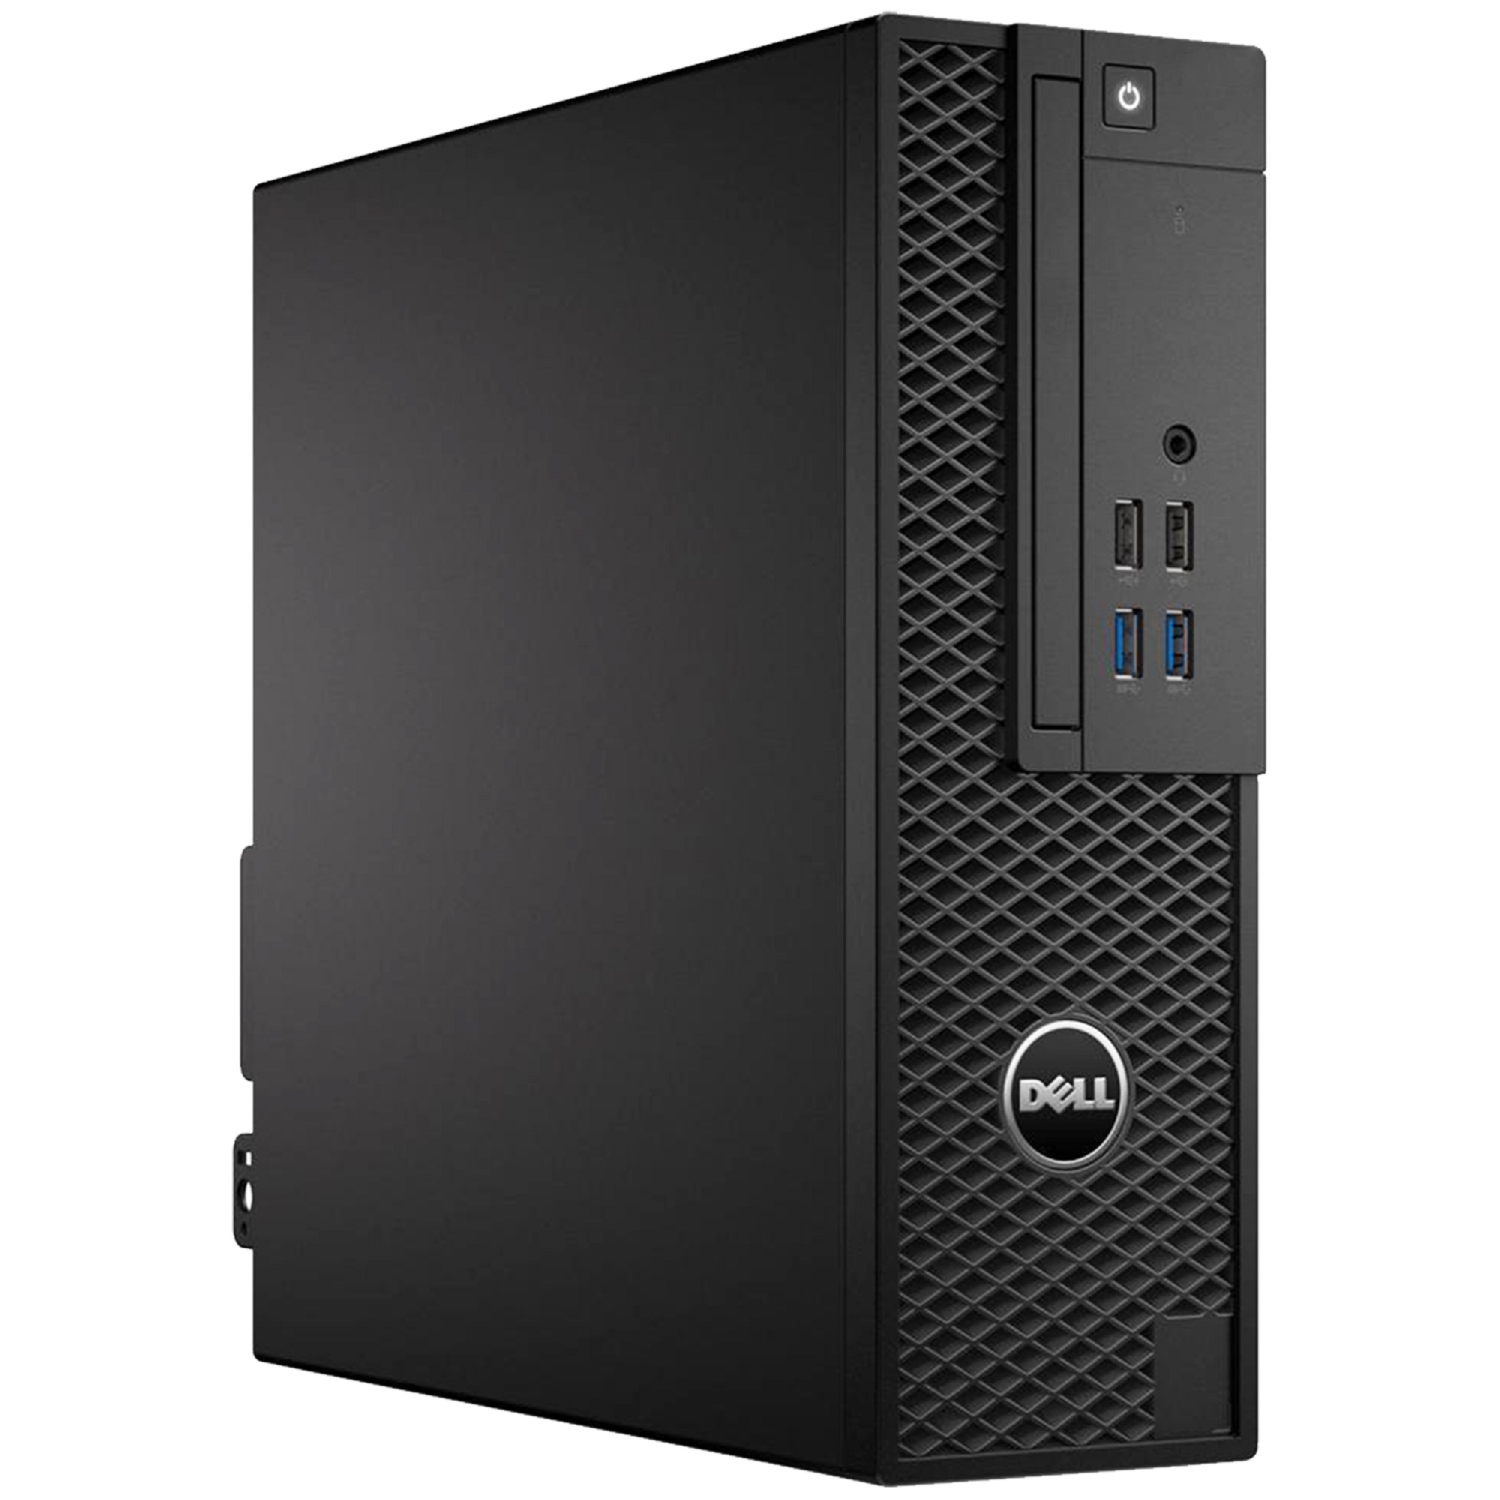 Refurbished(Good) - Business Desktop Solution Dell Precision 3420 SFF Computer PC| Intel Core i5 Processor| 1TB NVMe SSD| 32GB DDR4 RAM| Windows 10 Pro| Wireless Keyboard and Mouse